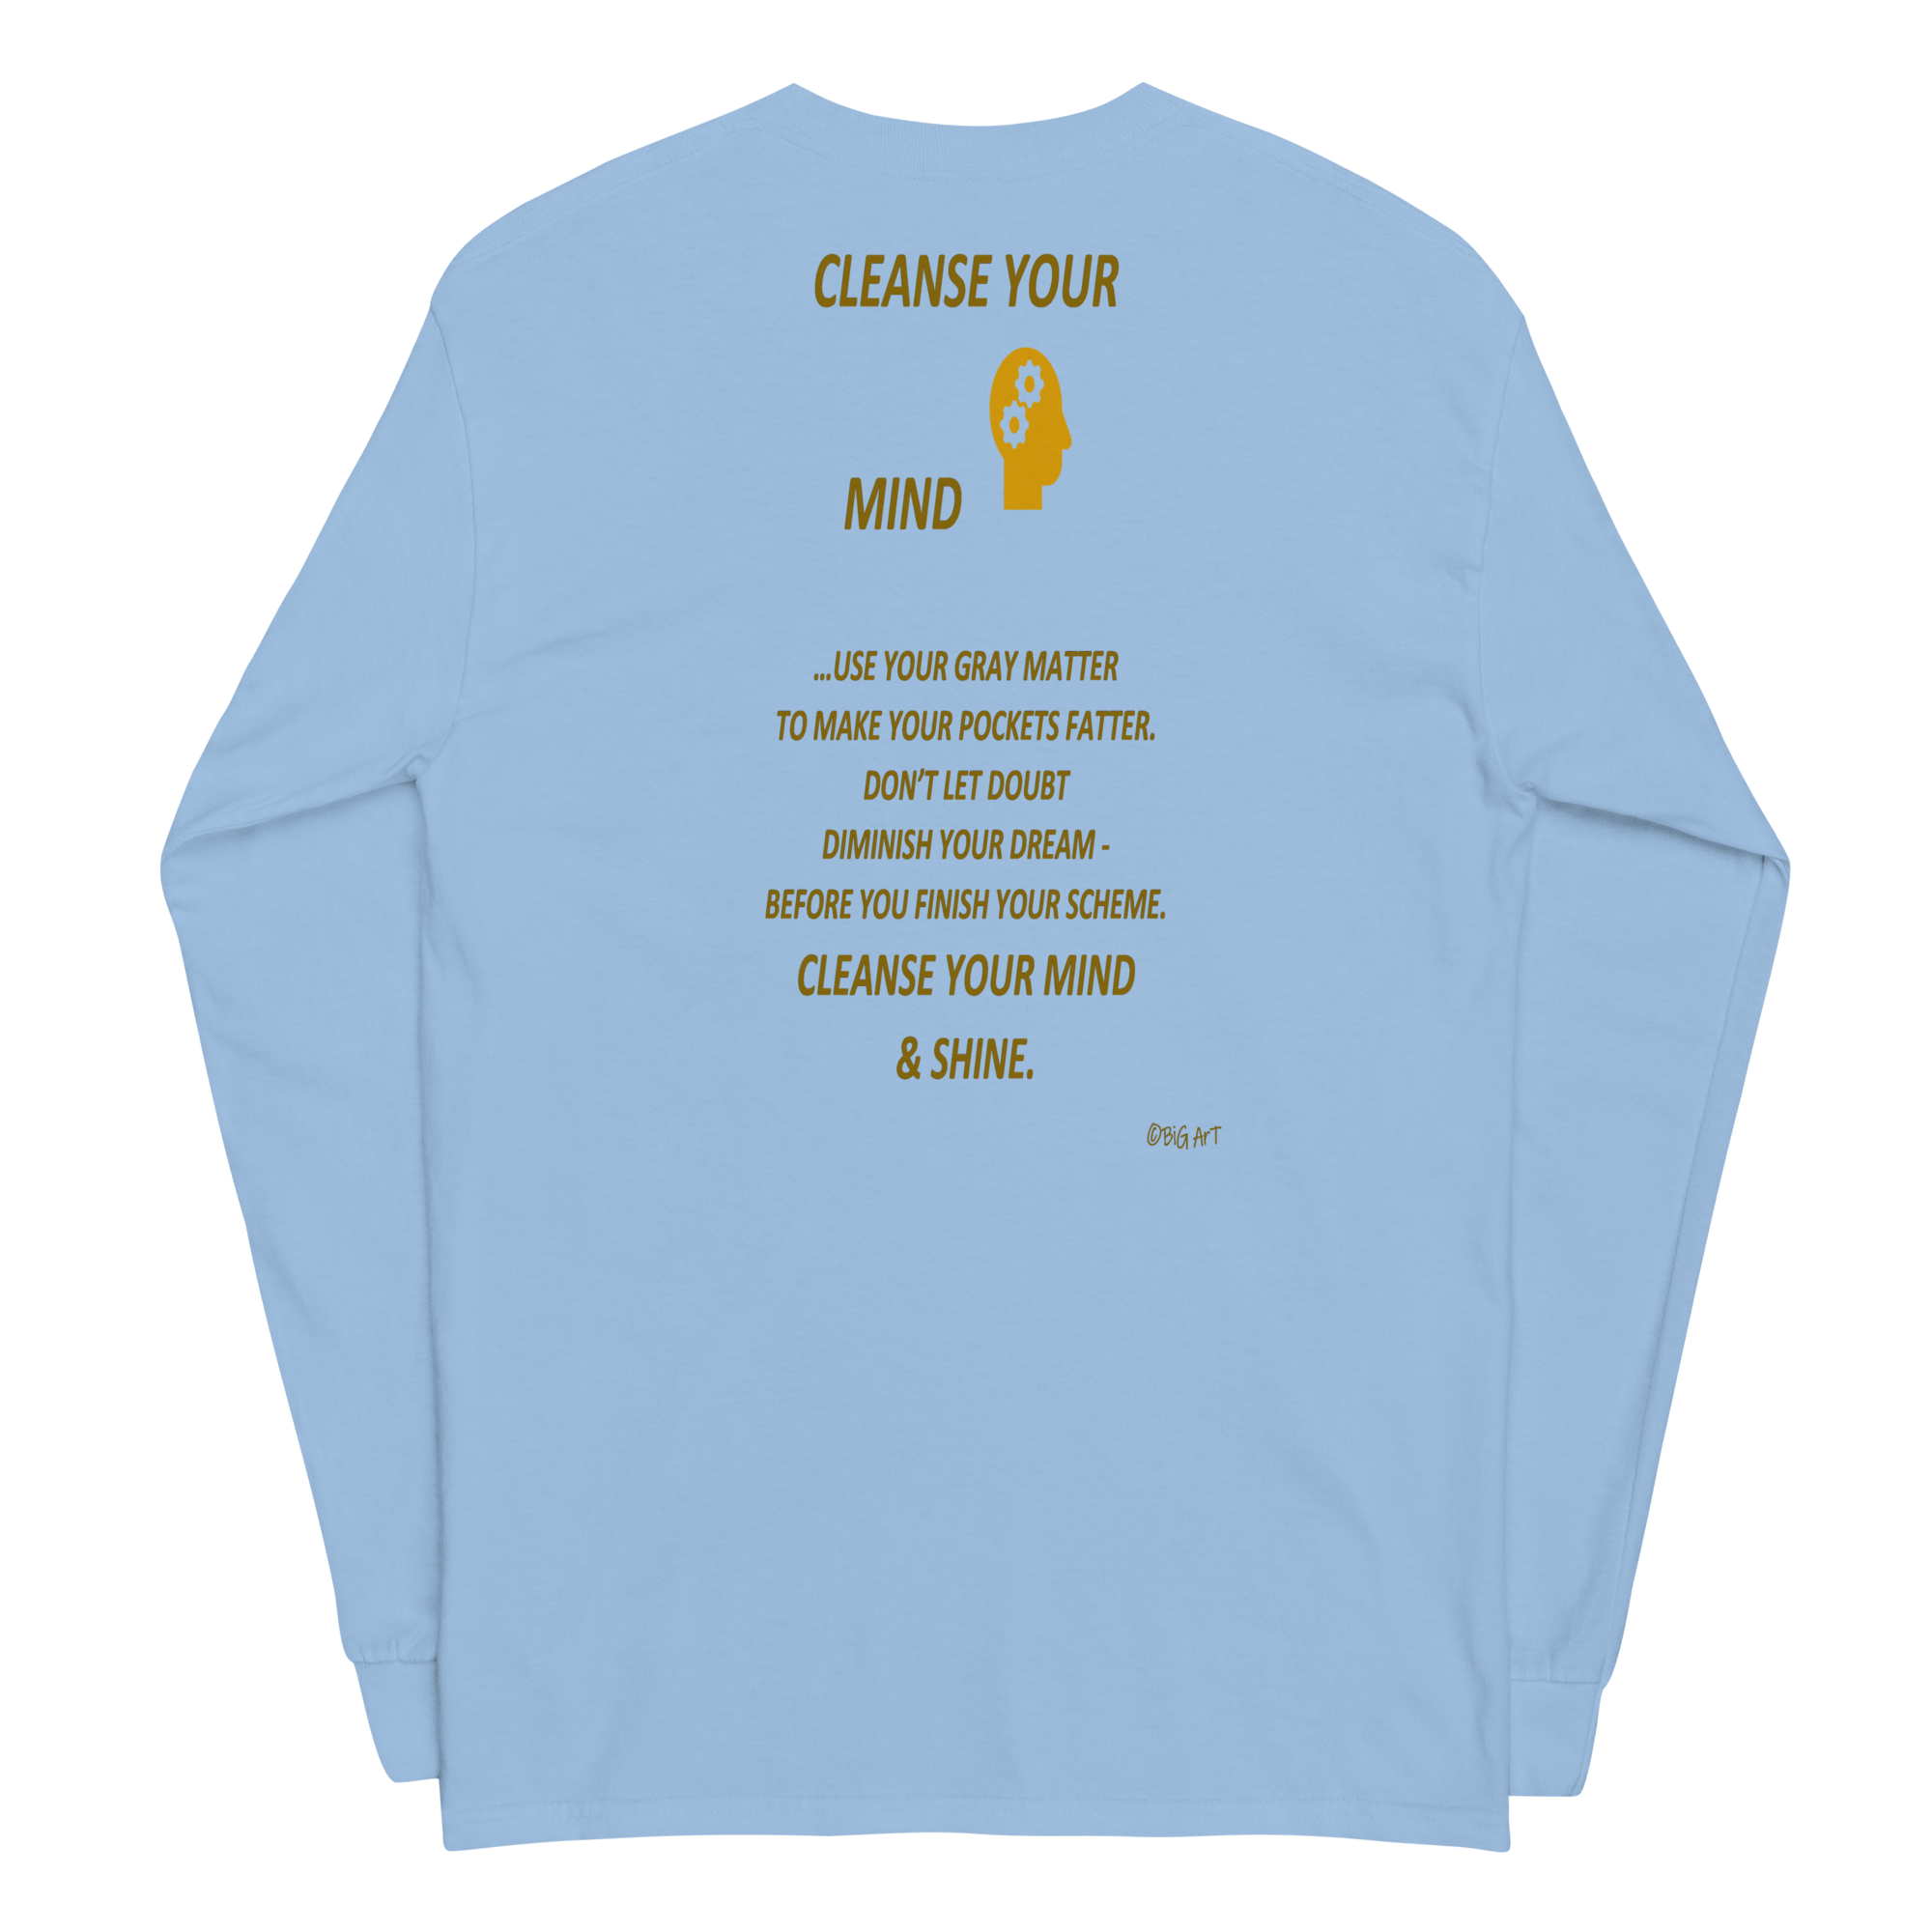 CLEANSE YOUR MIND Long Sleeve Shirt